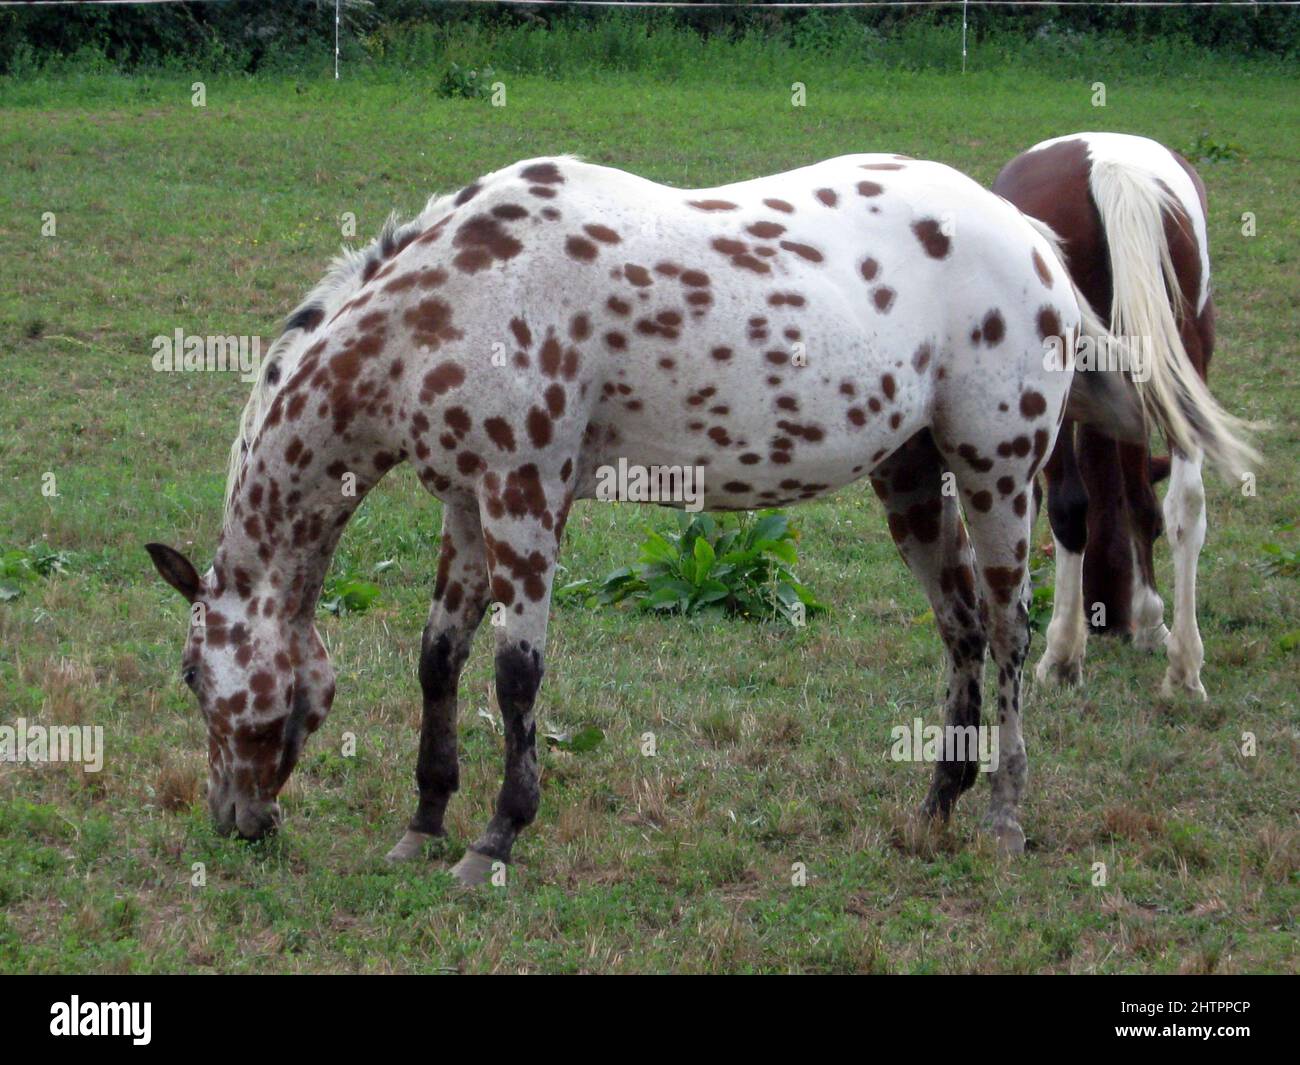 The Appaloosa is an American horse breed best known for its colorful spotted coat pattern. Stock Photo